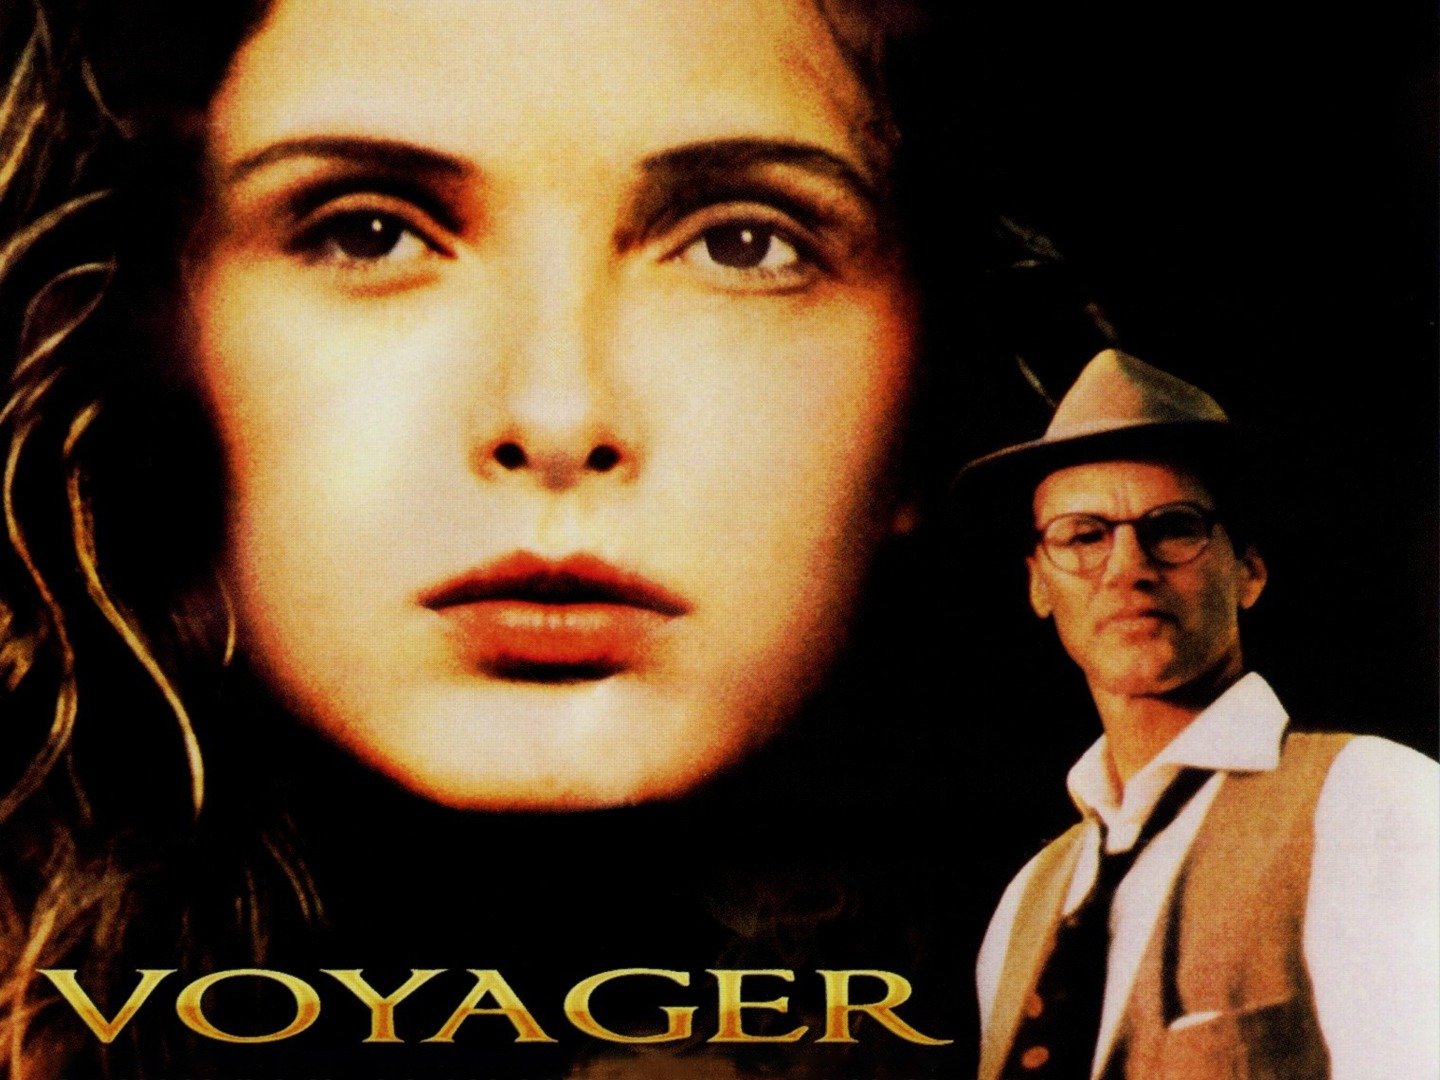 voyager 1 in movies